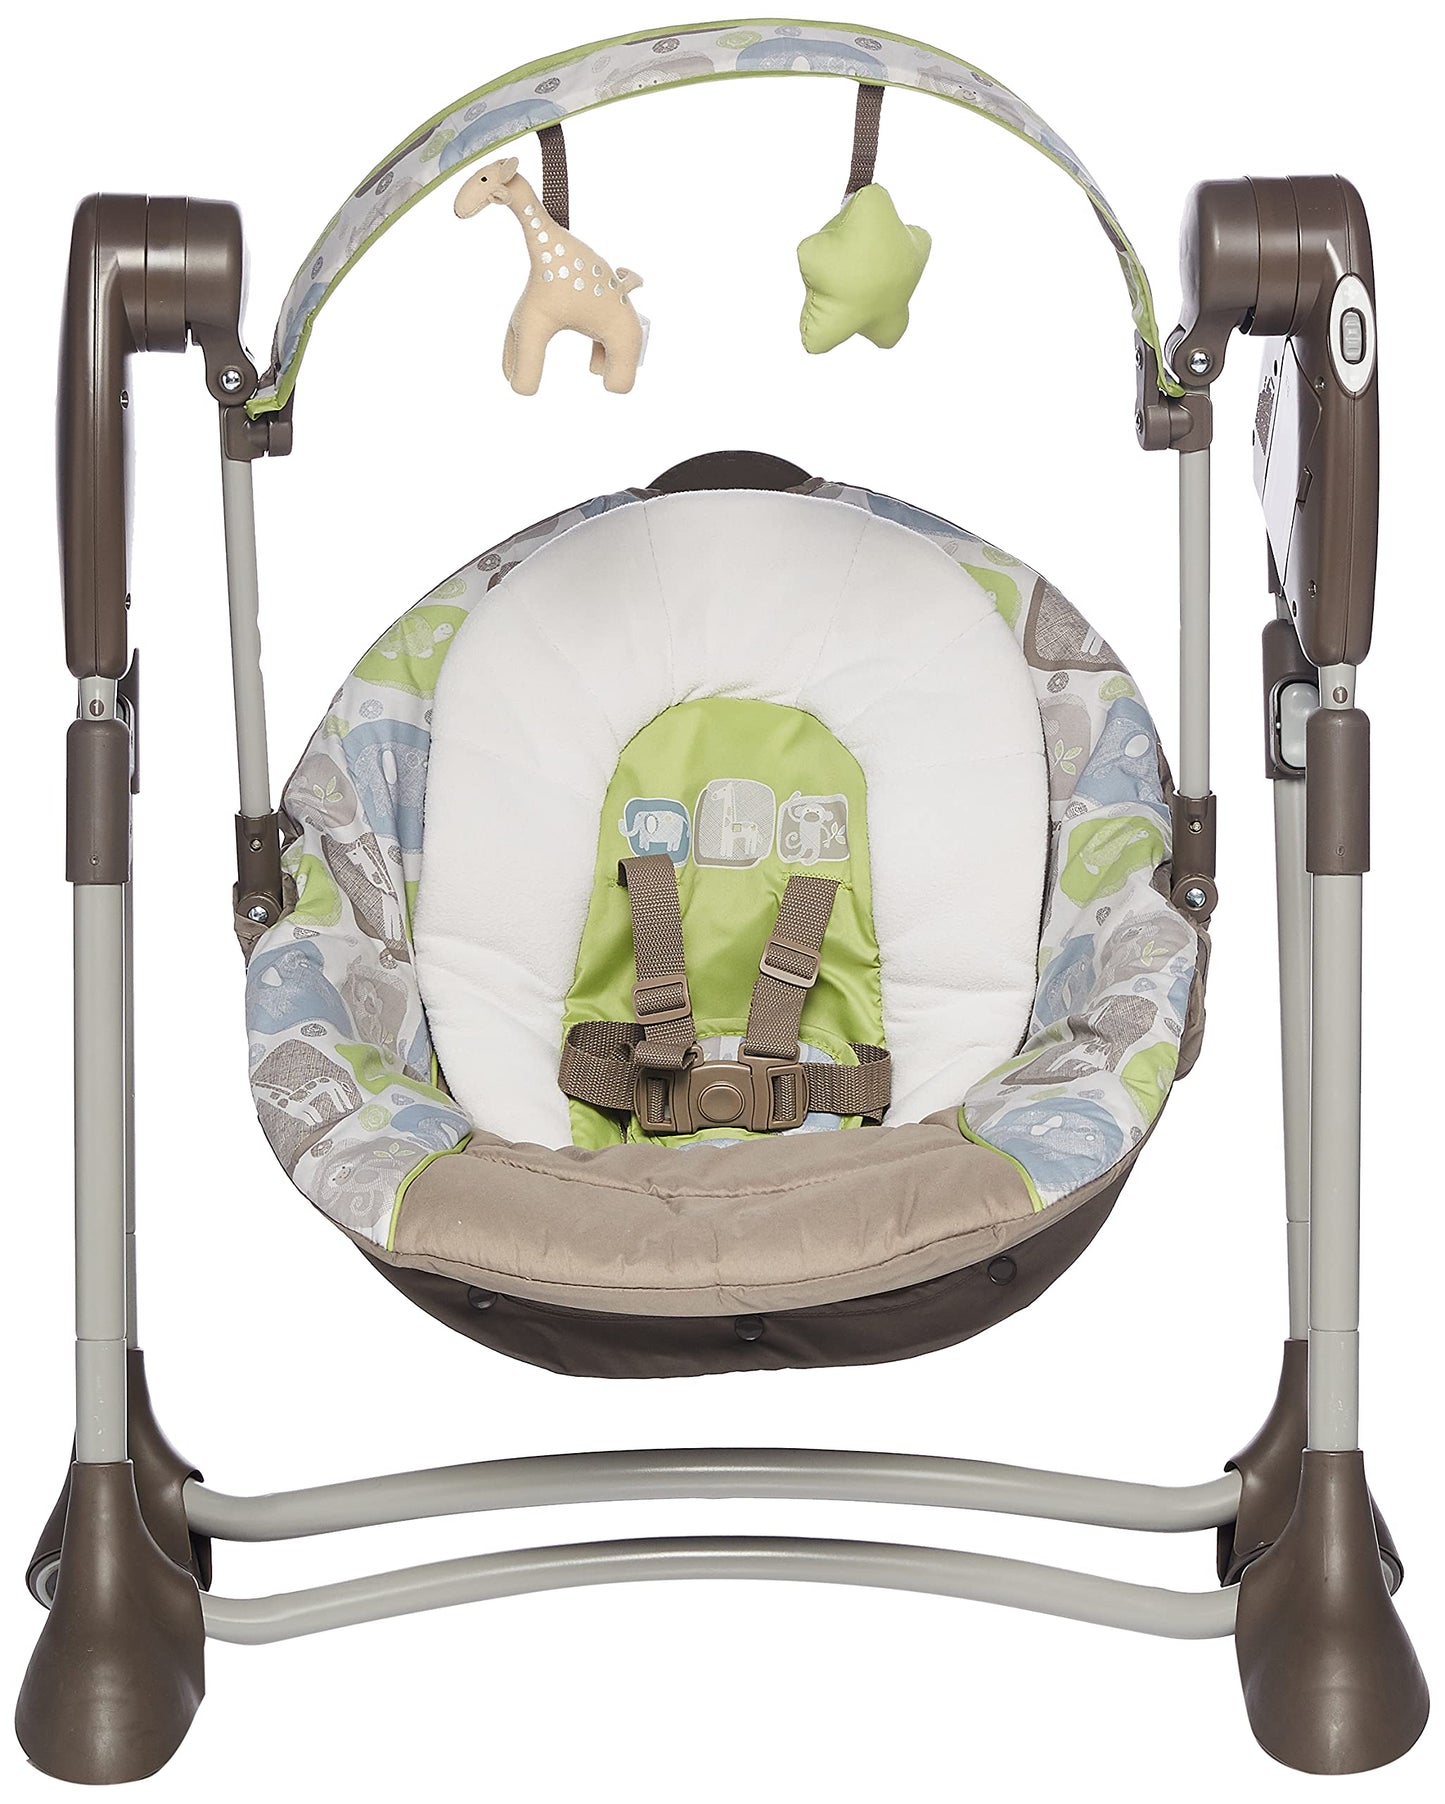 Graco 2-in-1 Portable Swing By Me